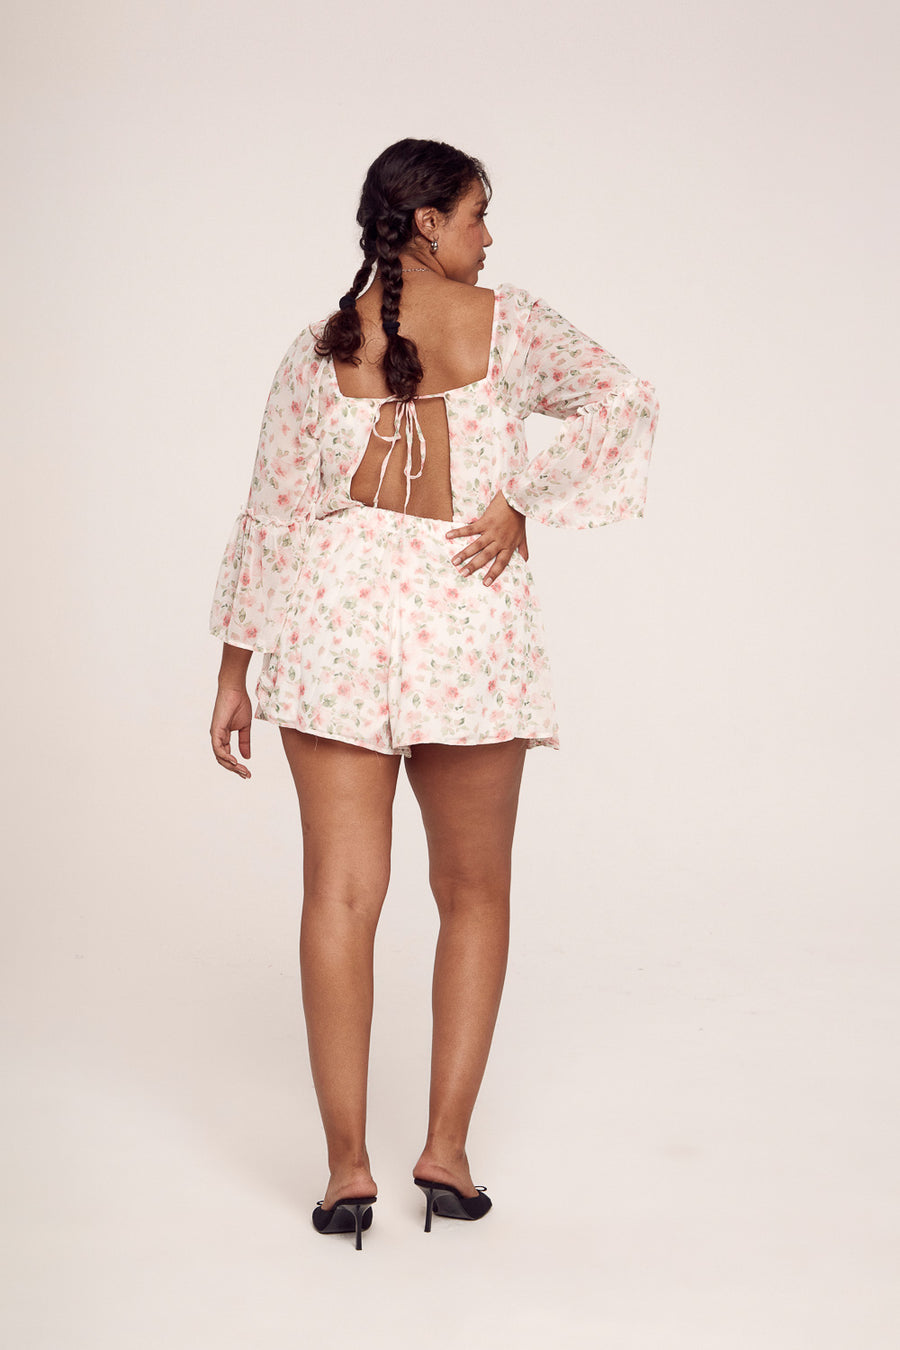 Ivory Floral Long Sleeve Romper - Trixxi Clothing